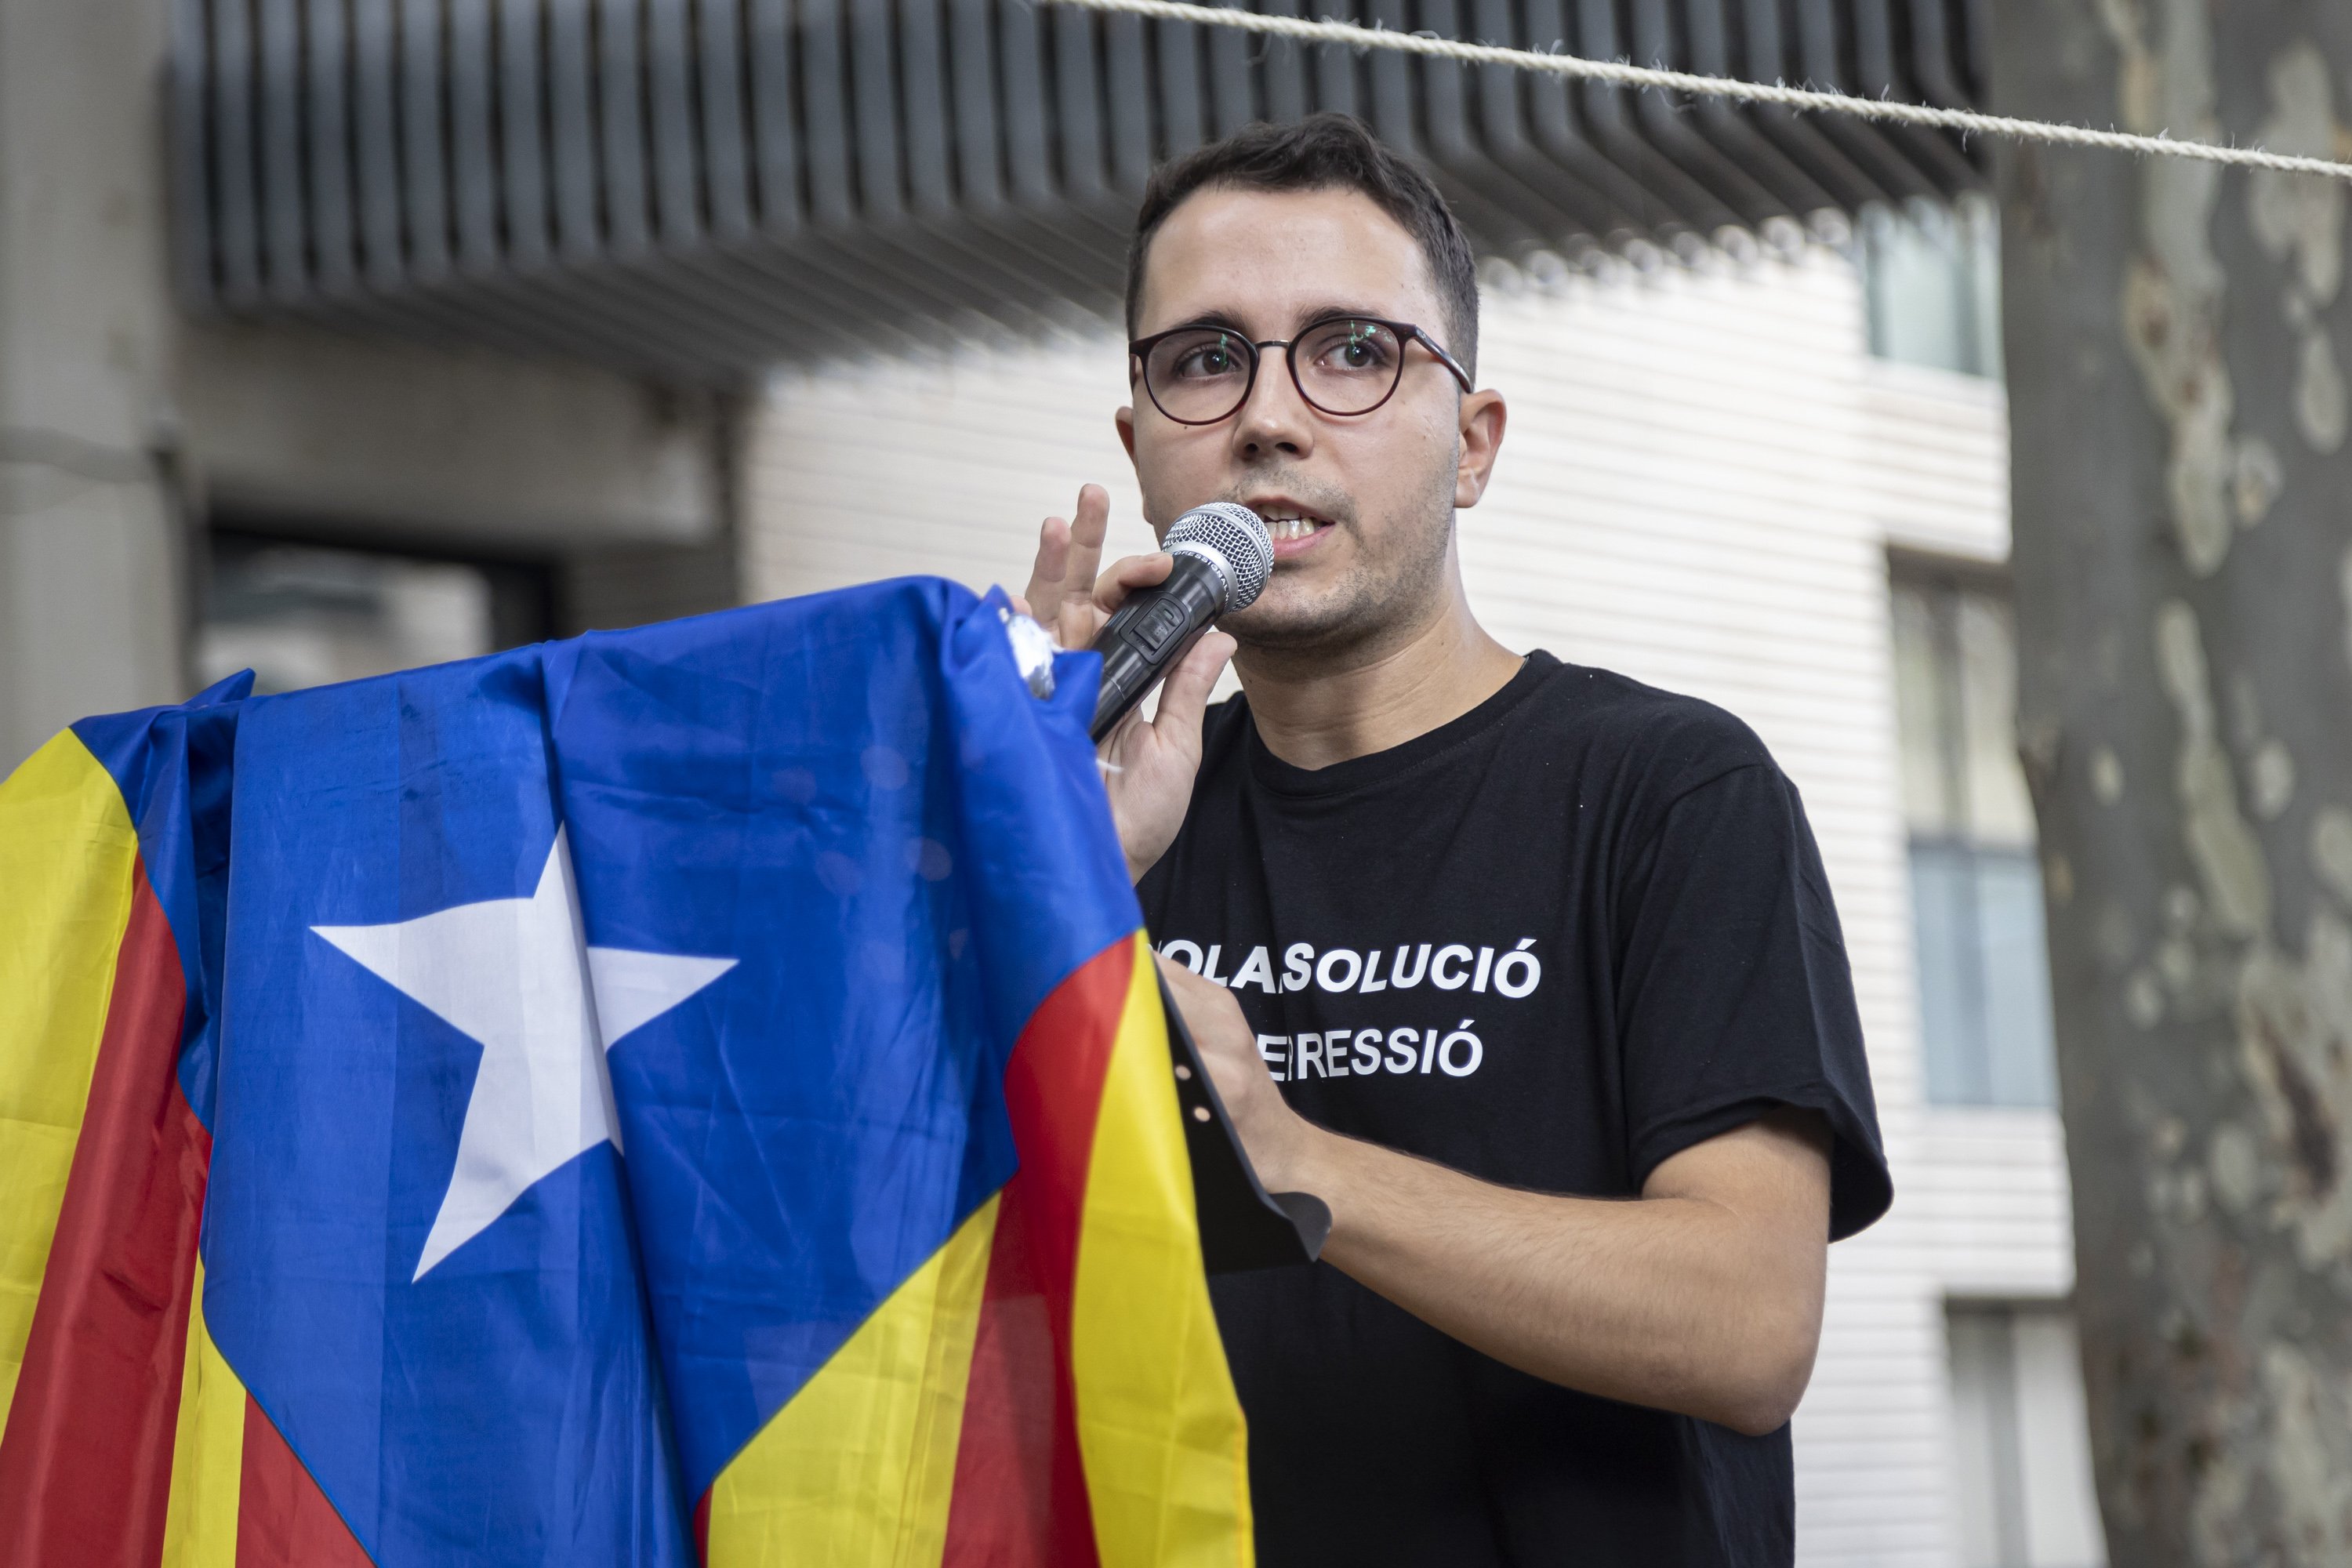 Court reduces sentence for pro-independence protester Oriol Calvo, saving him from jail